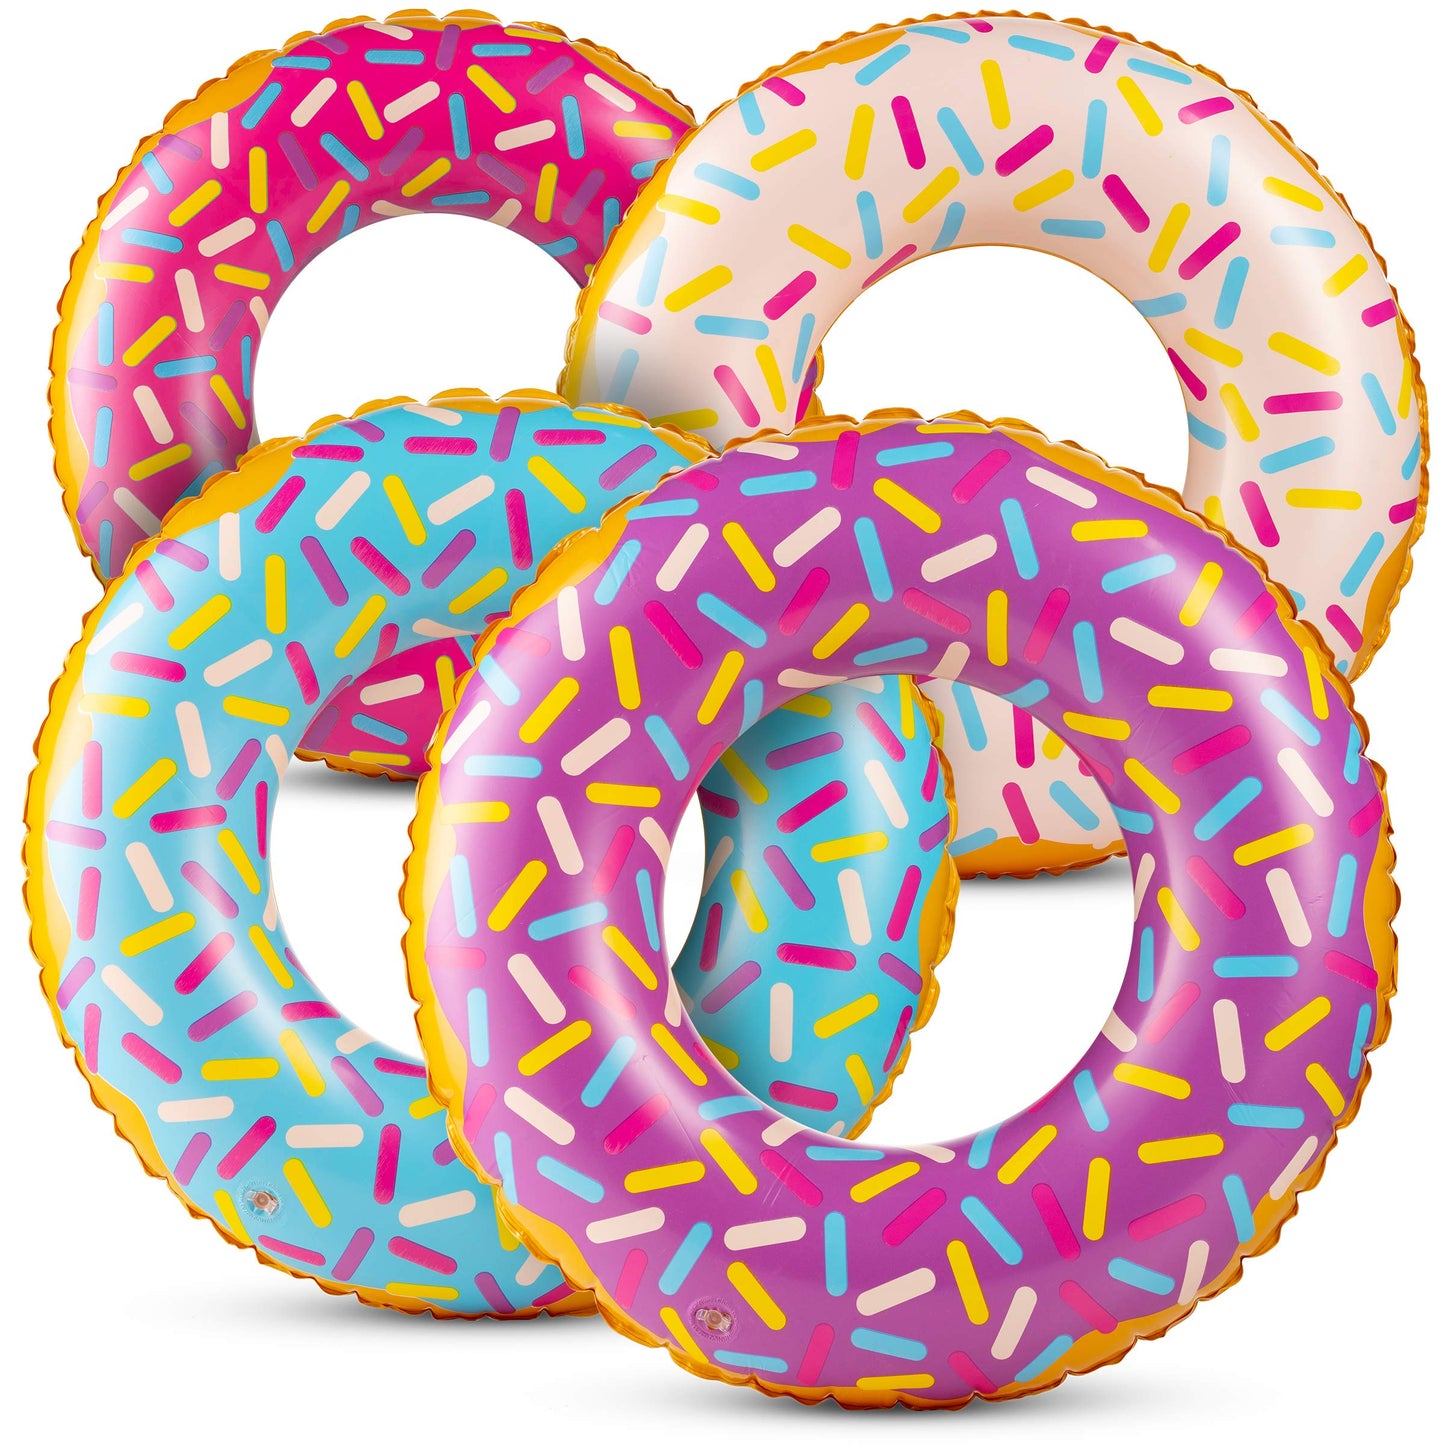 Inflatable Donuts (Pack of 4) 24 Inch Sprinkle Donut Inflatables, in Assorted Neon Colors, for Summer, Pool,Beach Party Decorations, Floating Ring for Younger Kids and Toddlers